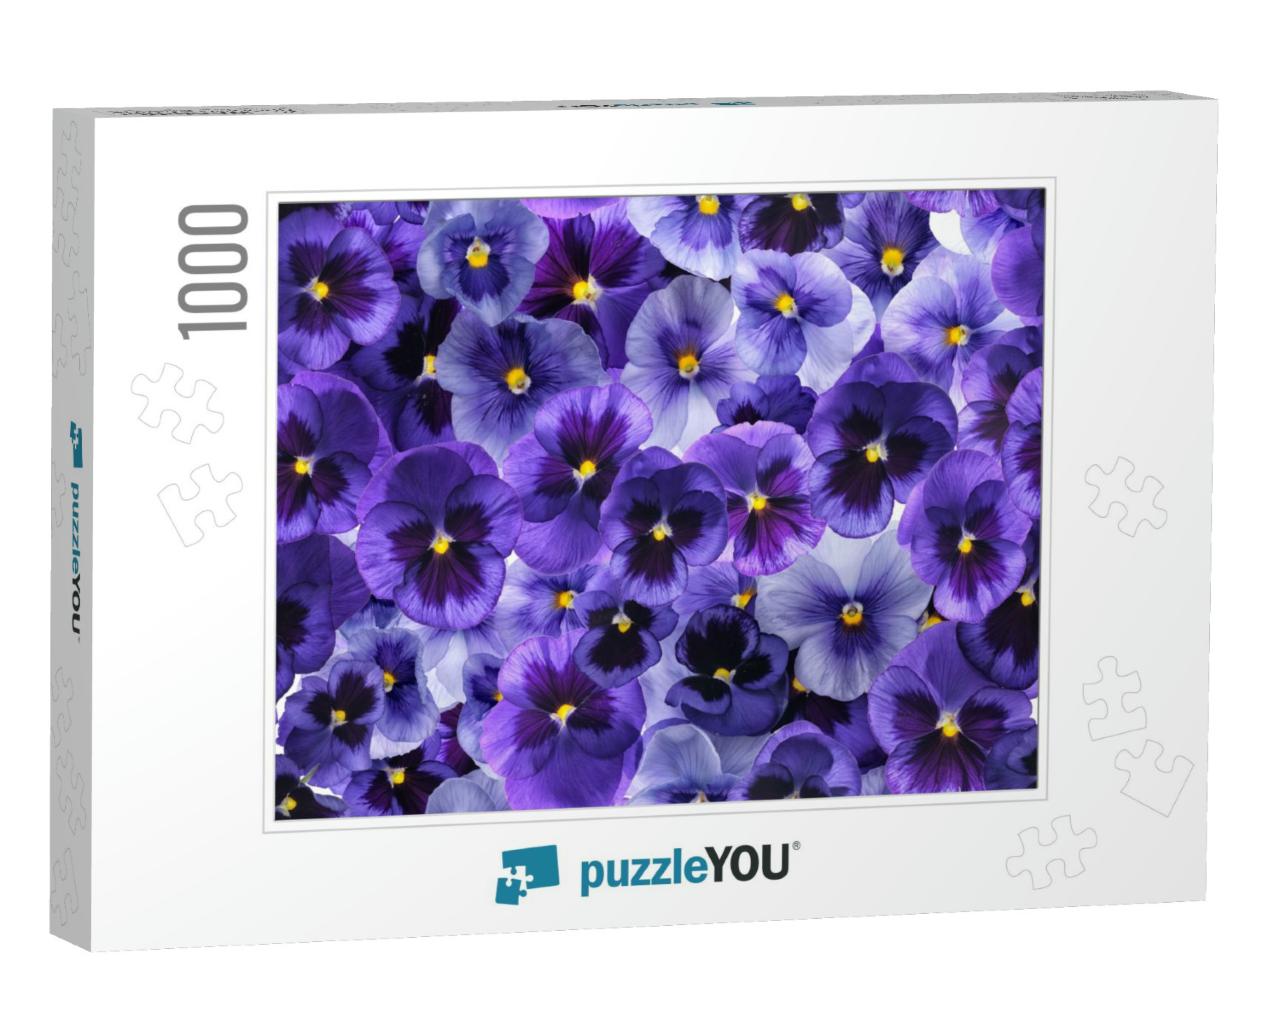 Photographed Fresh Purple Viola Flowers, Covering Complet... Jigsaw Puzzle with 1000 pieces